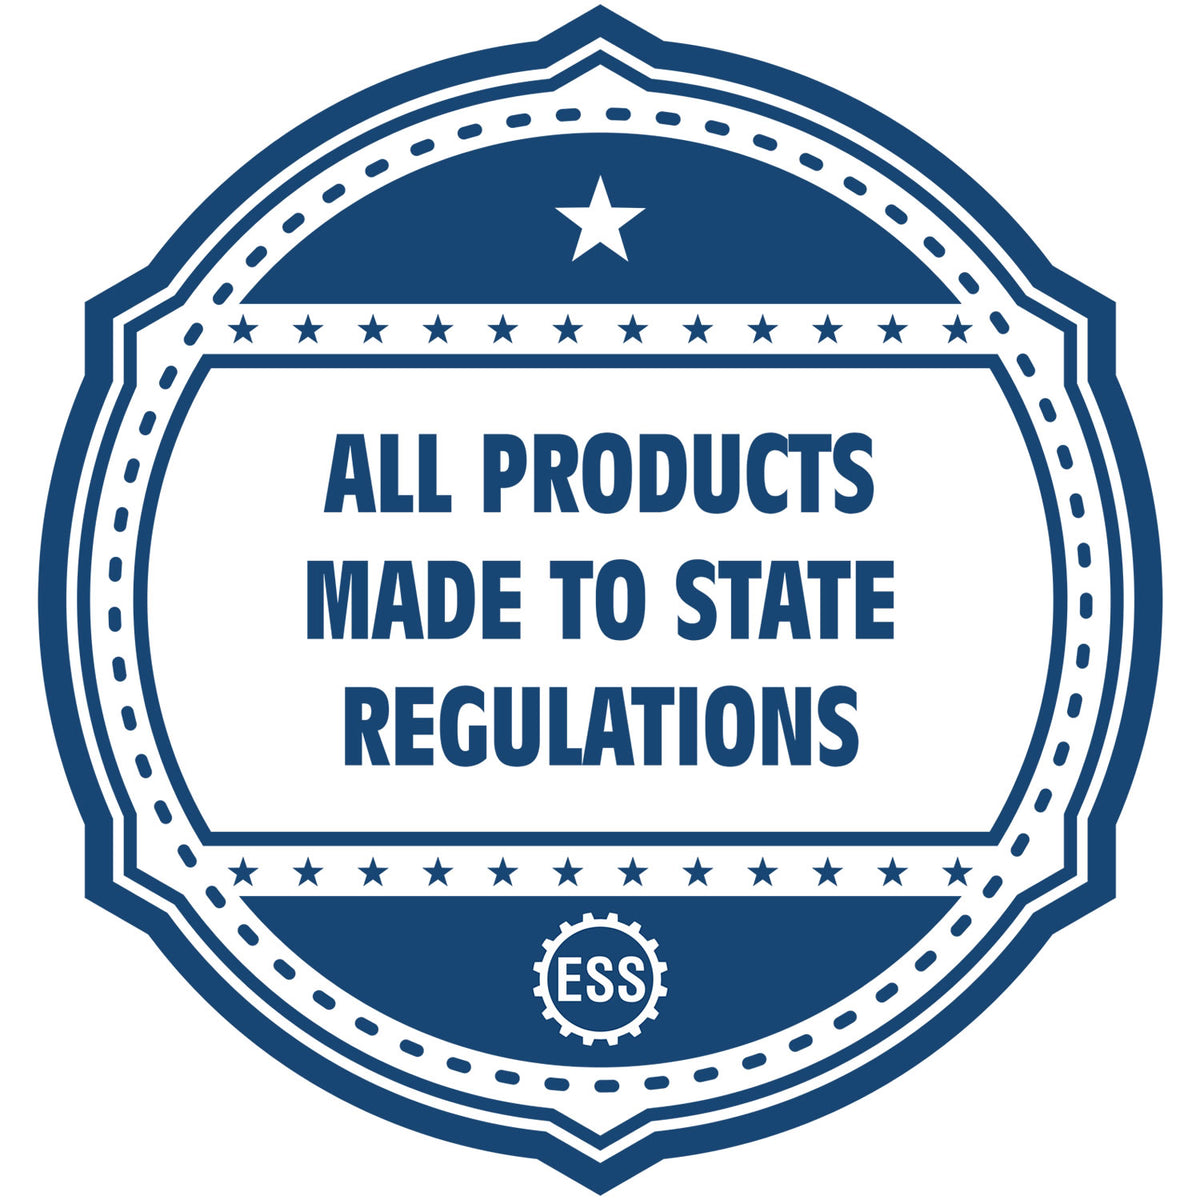 An icon or badge element for the Handheld South Carolina Professional Engineer Embosser showing that this product is made in compliance with state regulations.